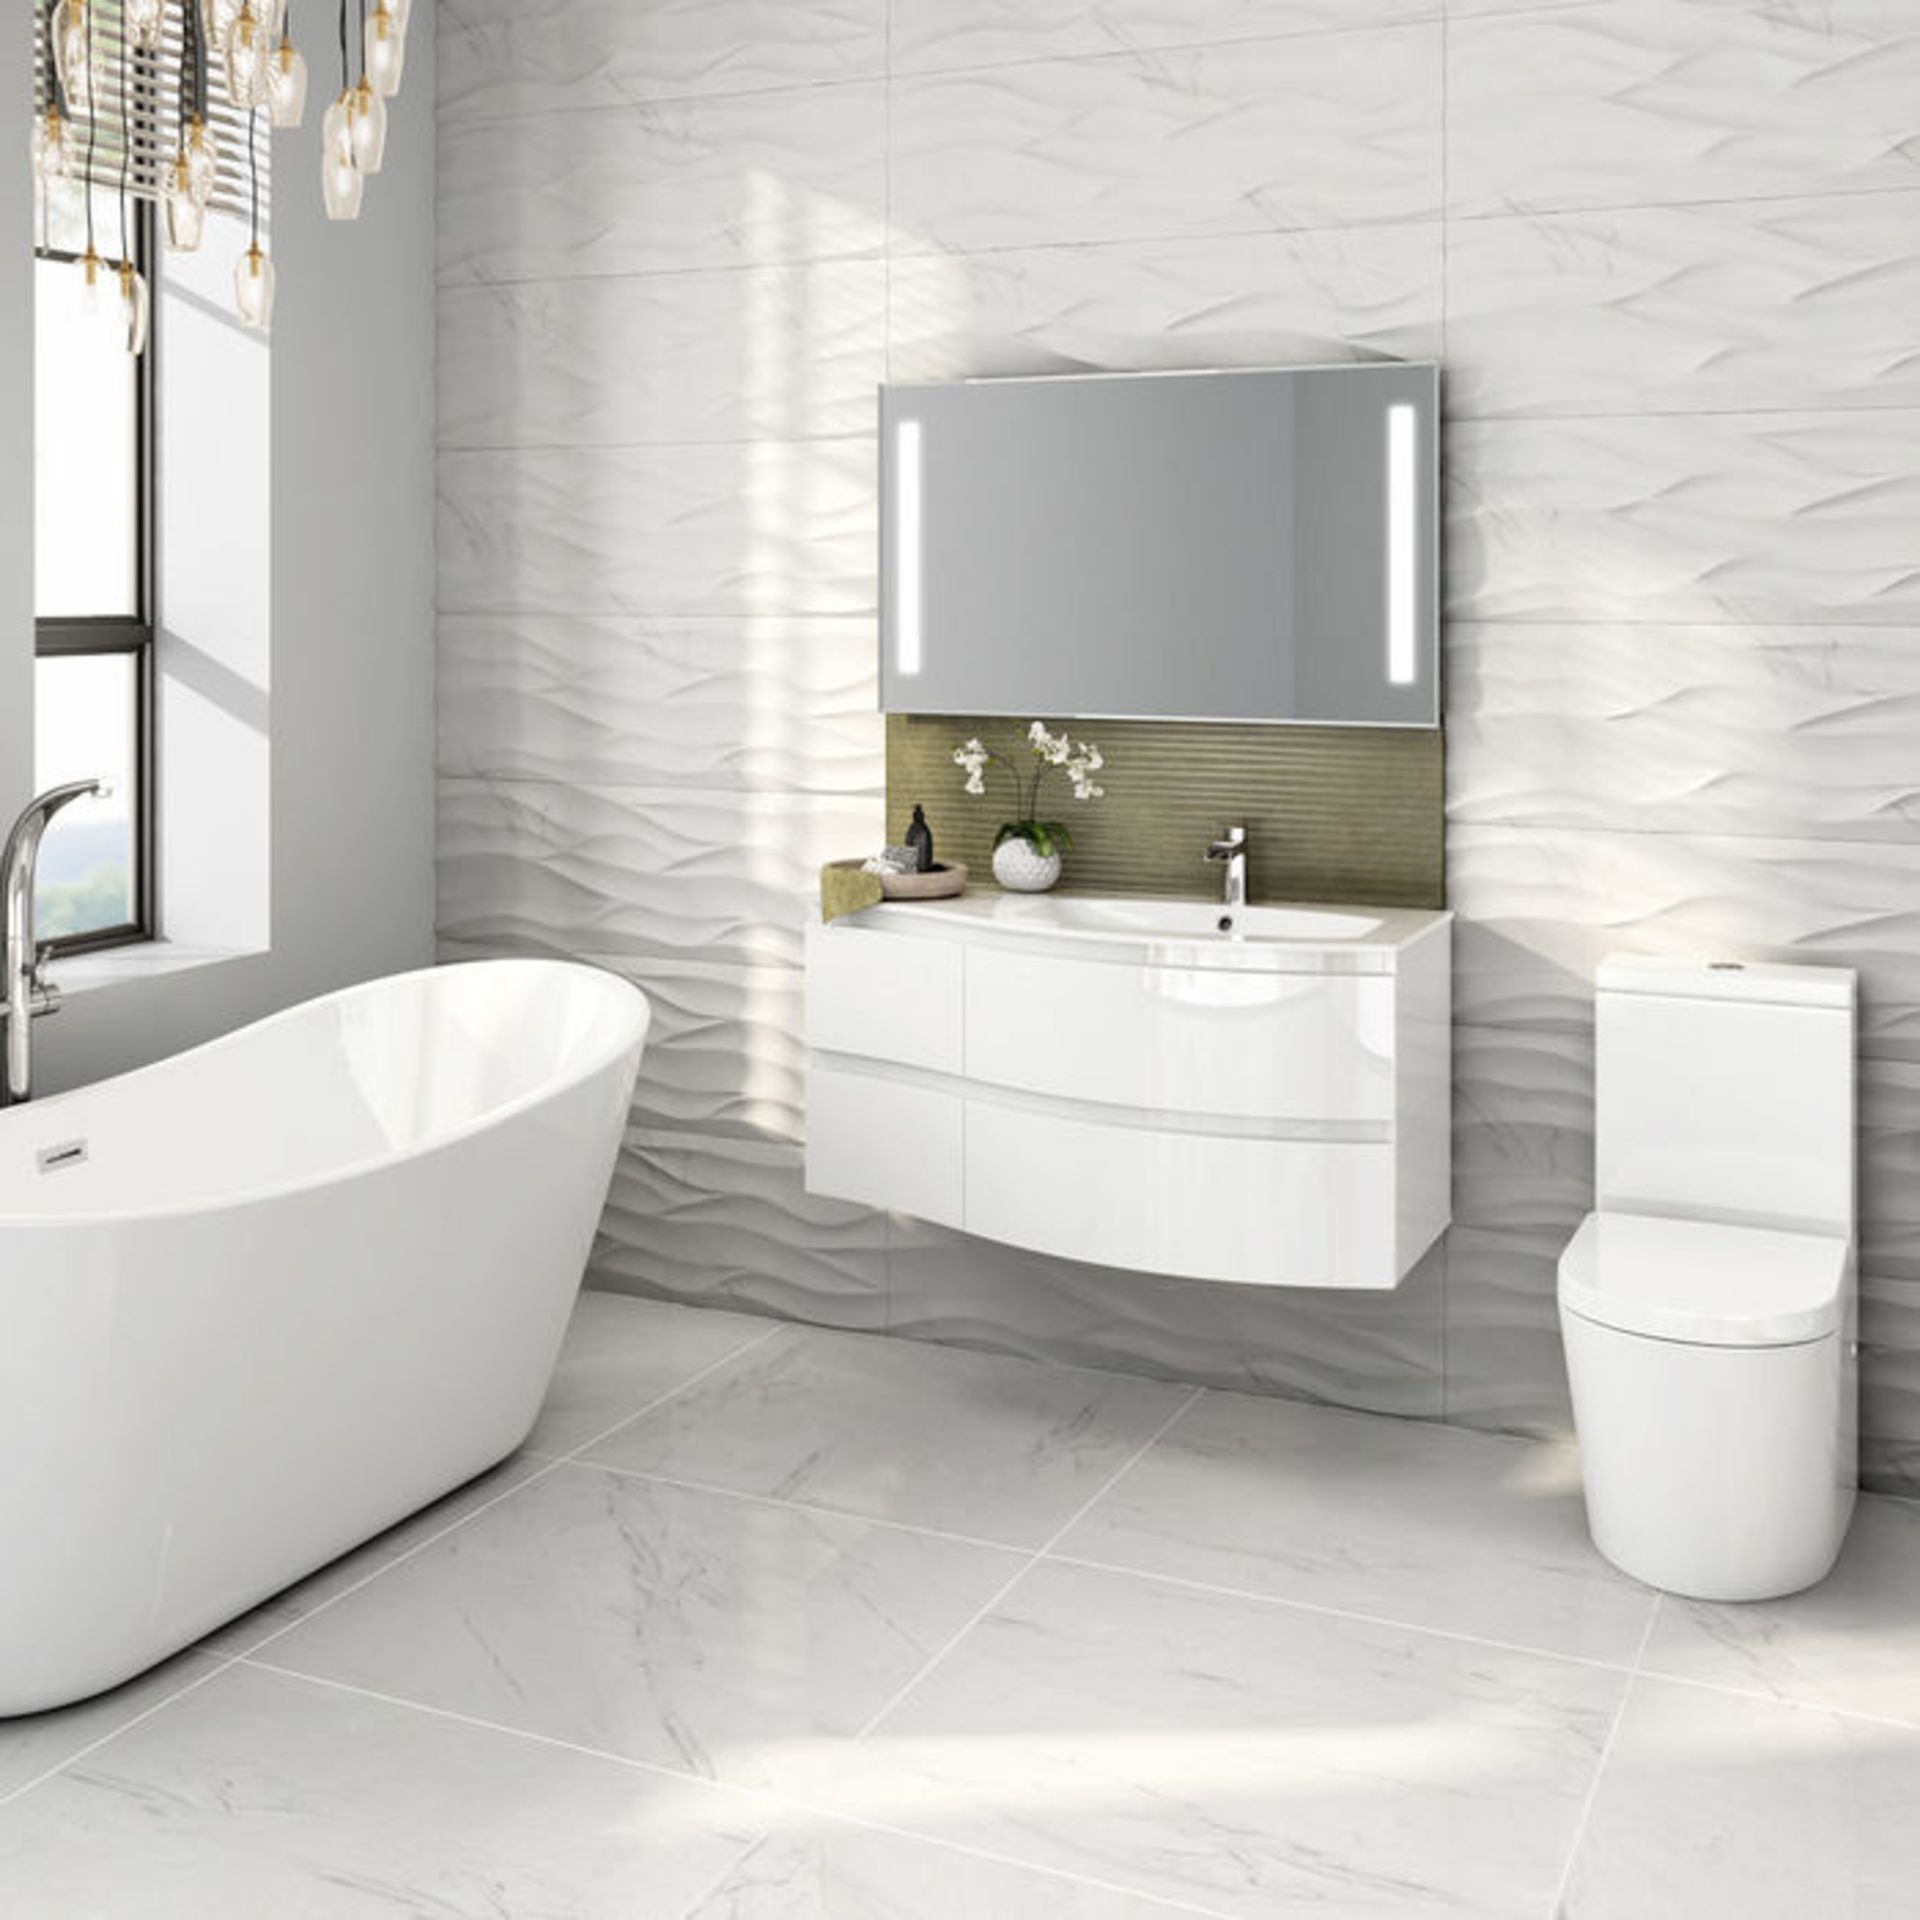 NEW 1040mm Amelie High Gloss White Curved Vanity Unit - Right Hand - Wall Hung. RRP £899.99. ... - Image 2 of 5